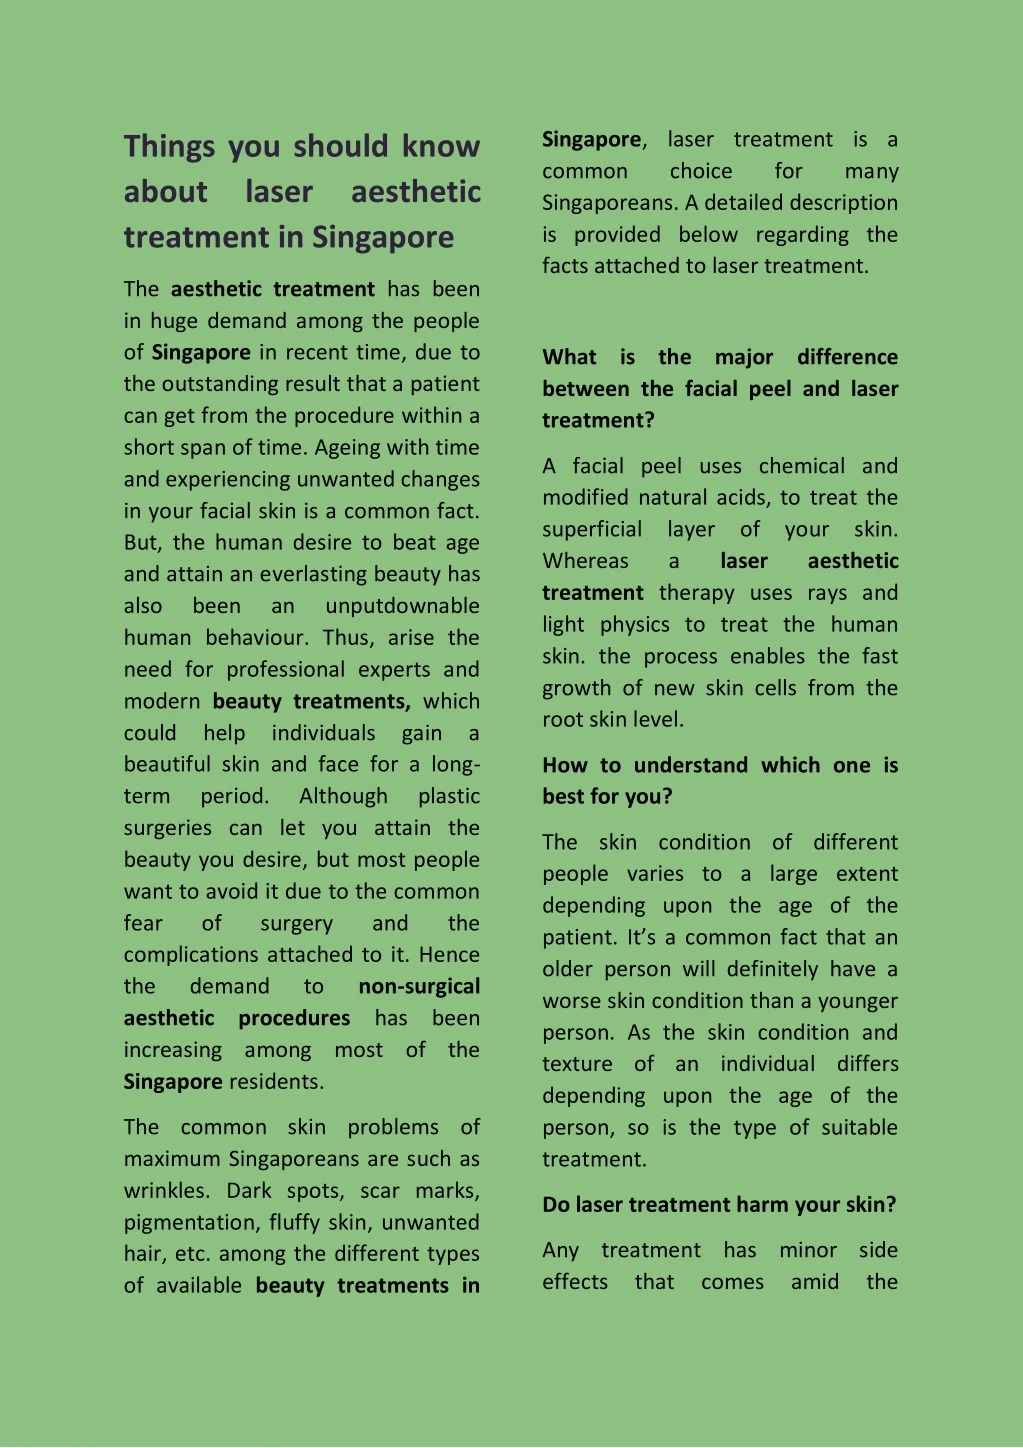 singapore laser treatment is a common choice